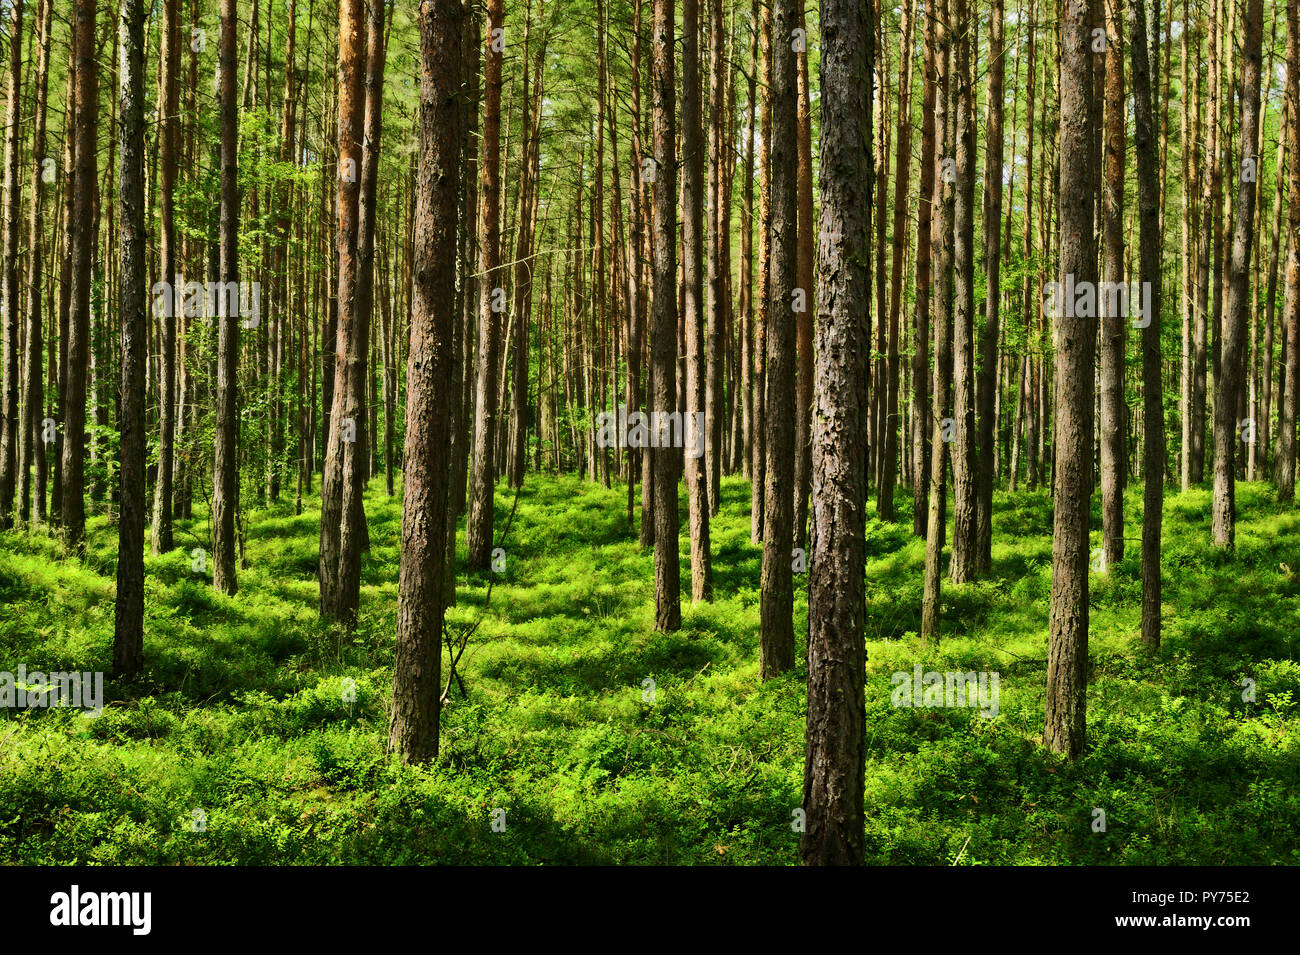 Evergreen coniferous pine forest with green bilberry plants on the forest floor. Pinewood with Scots pine Pinus sylvestris trees in Pomerania, Poland. Stock Photo